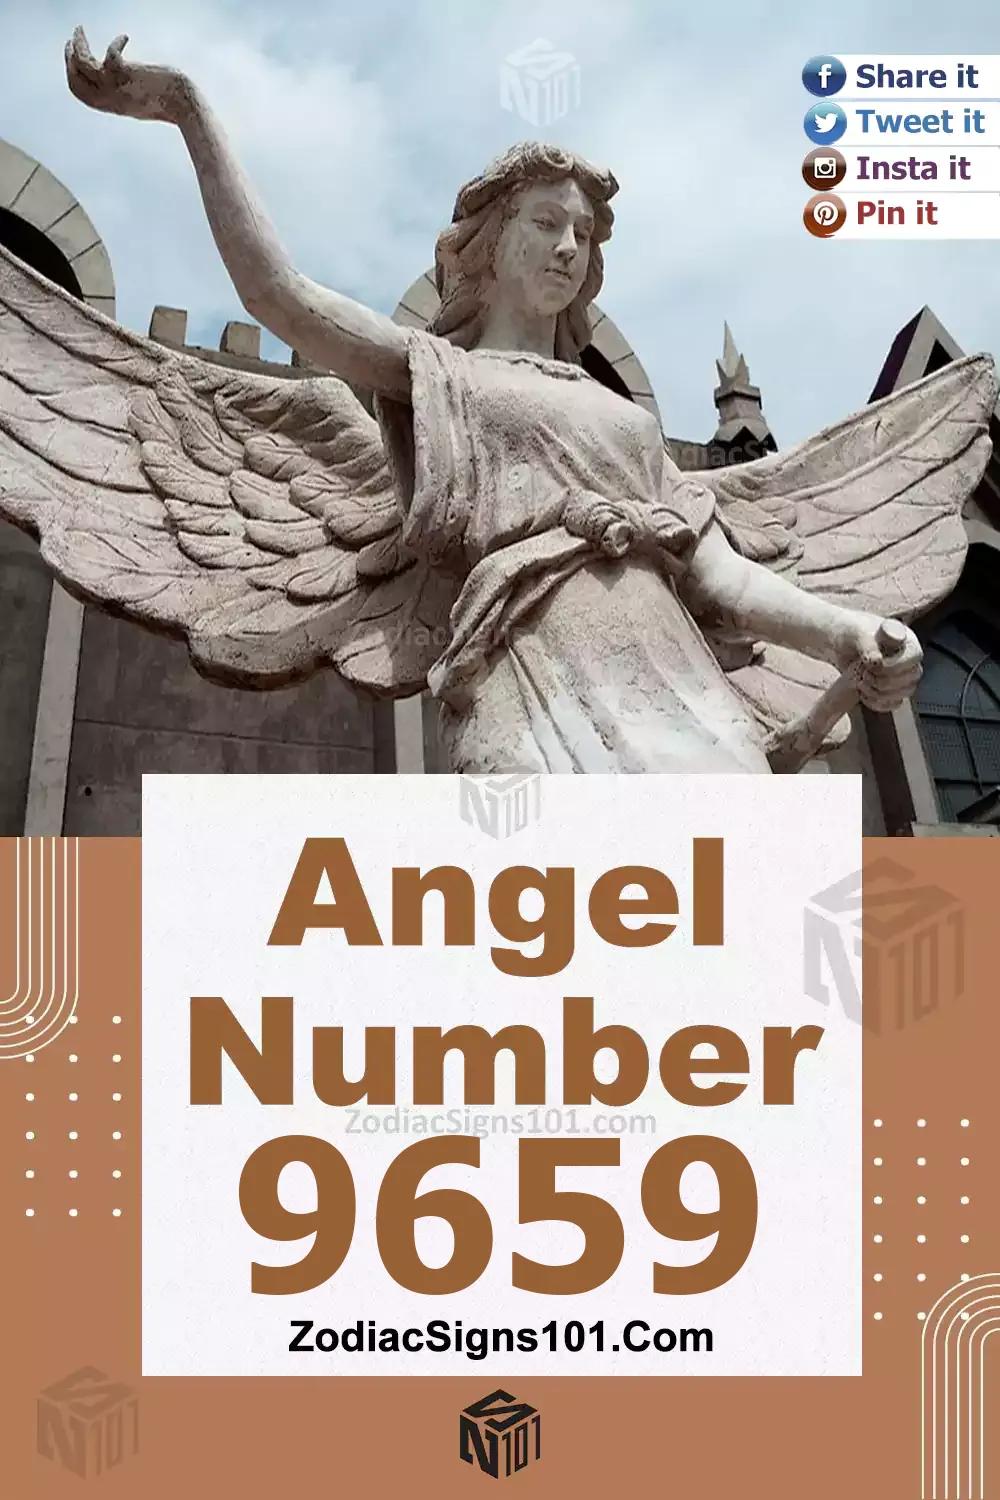 9659 Angel Number Meaning